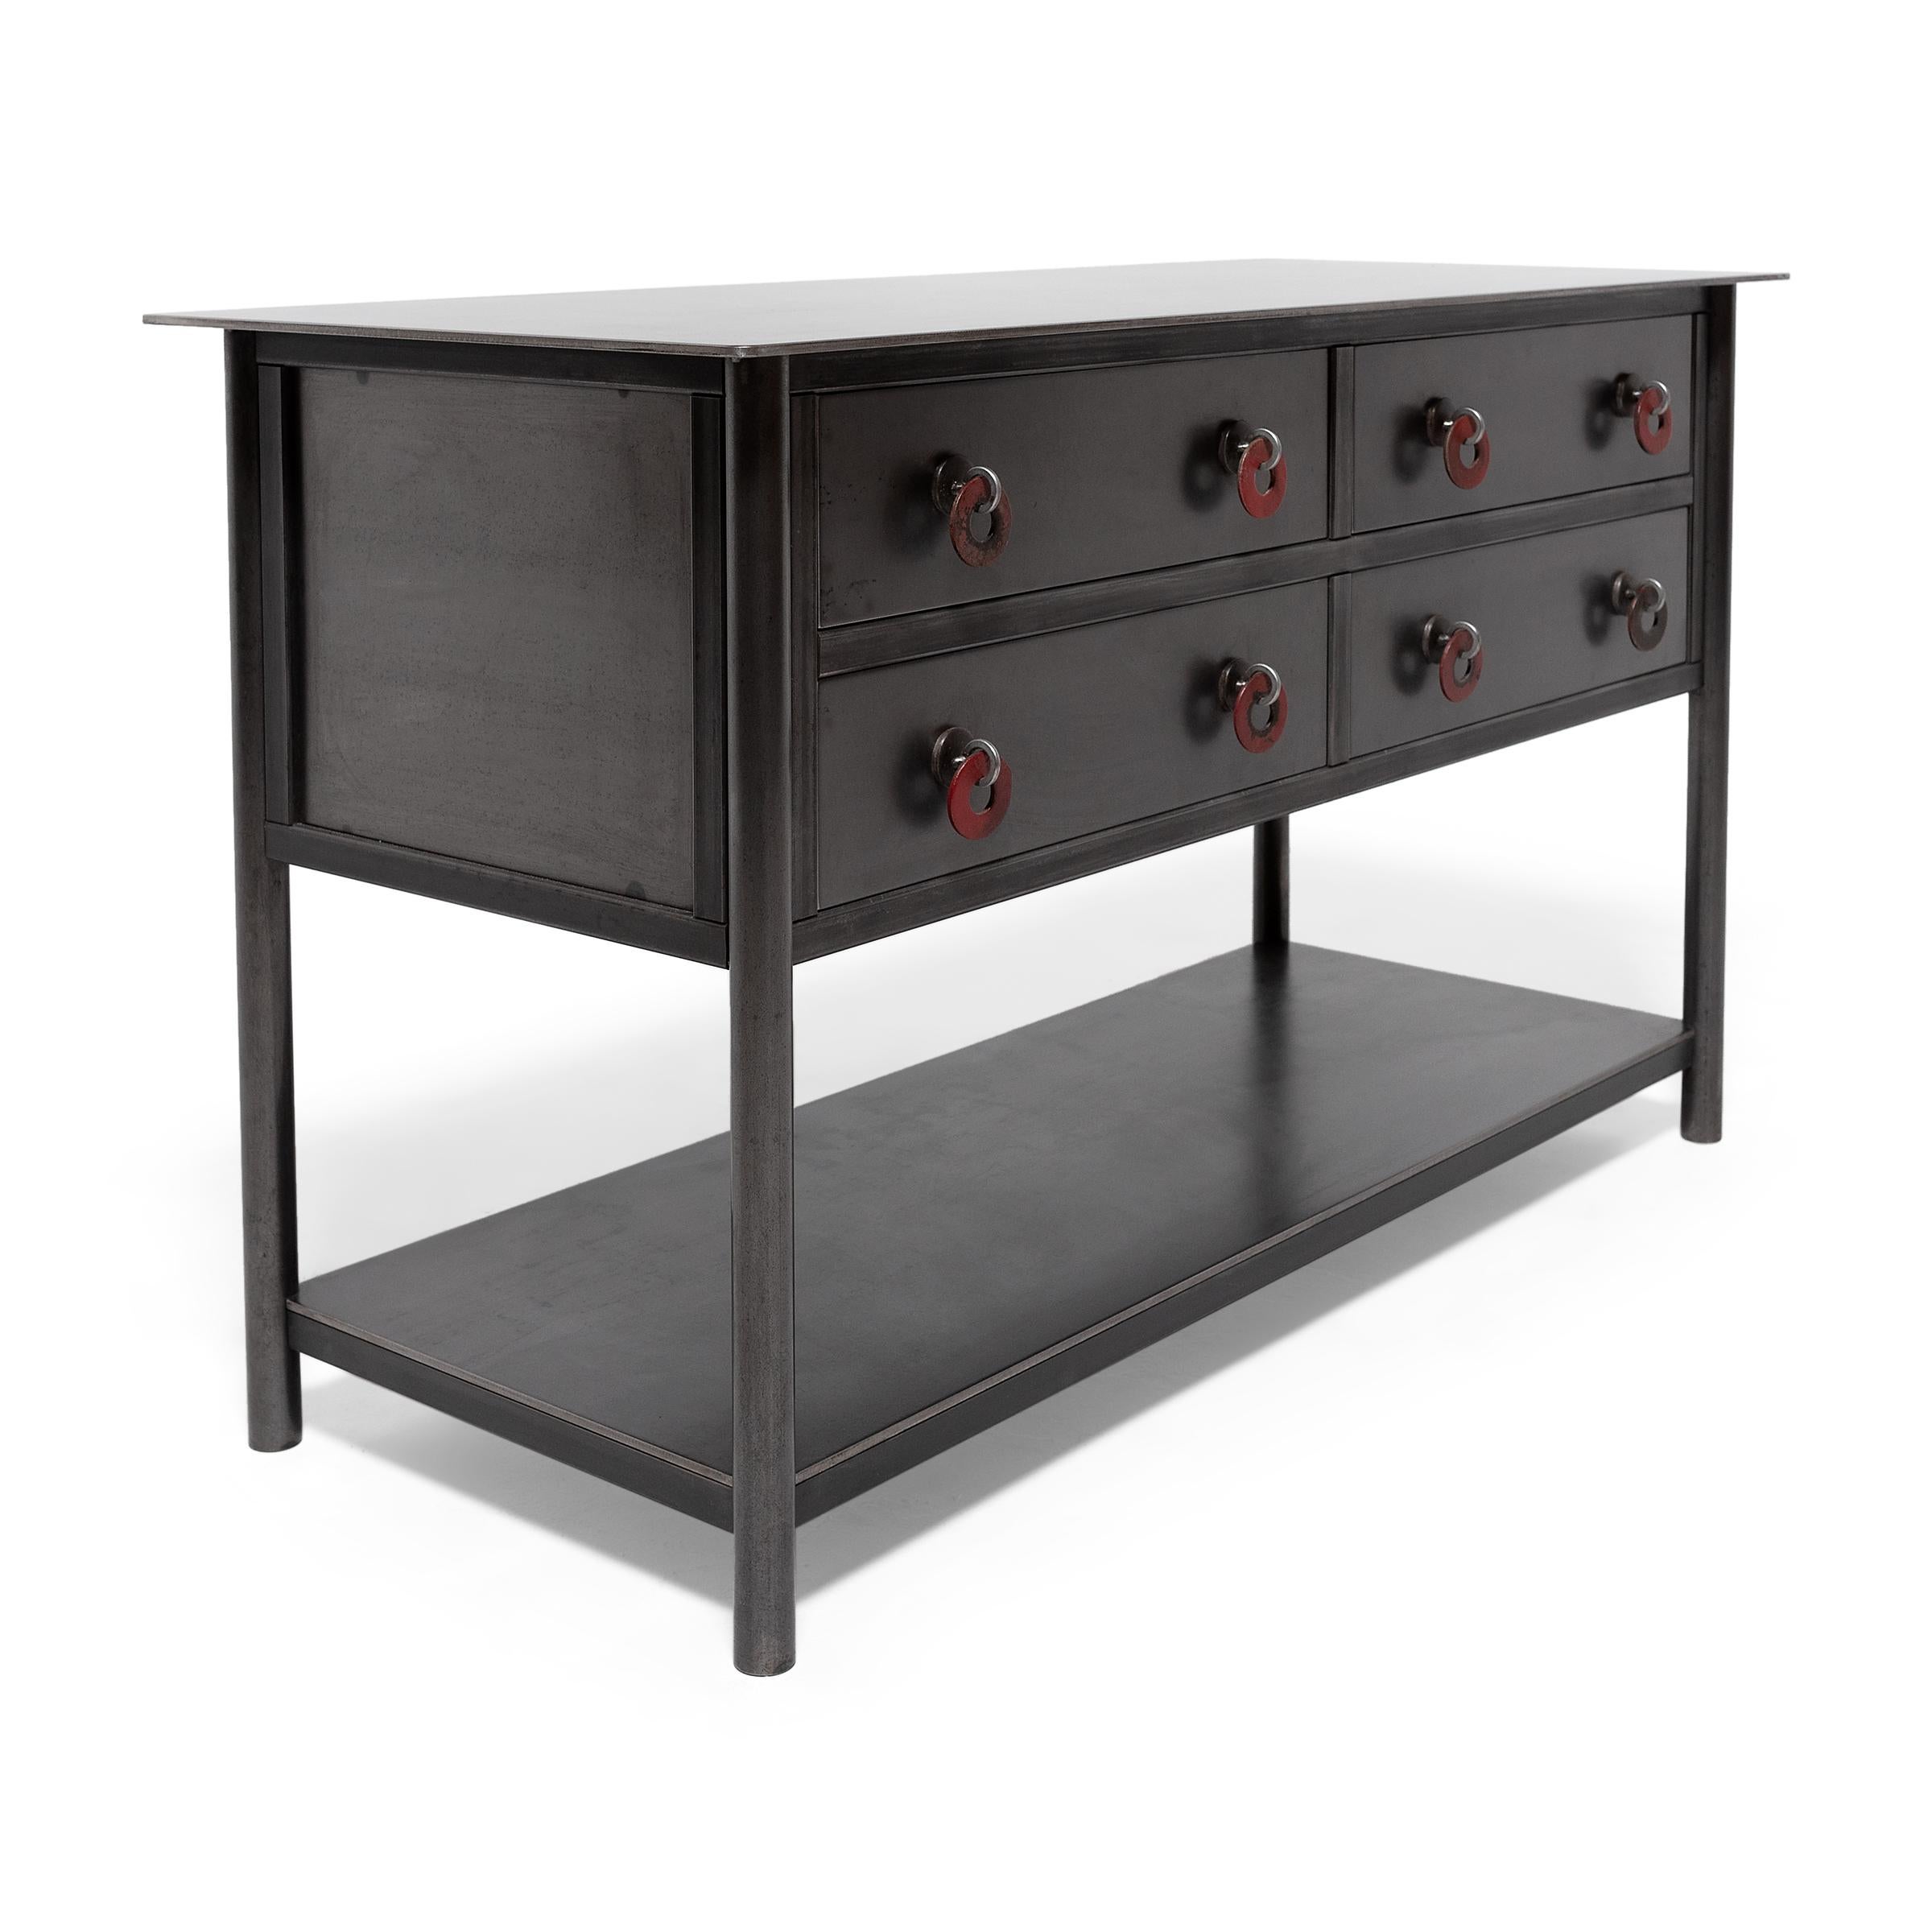 Created exclusively for Pagoda Red, the Ming Steel Collection by artist Jim Rose forges a connection between Shaker minimalism and the simplified lines and austere aesthetic of Ming-dynasty furniture. The culmination of years of studying the